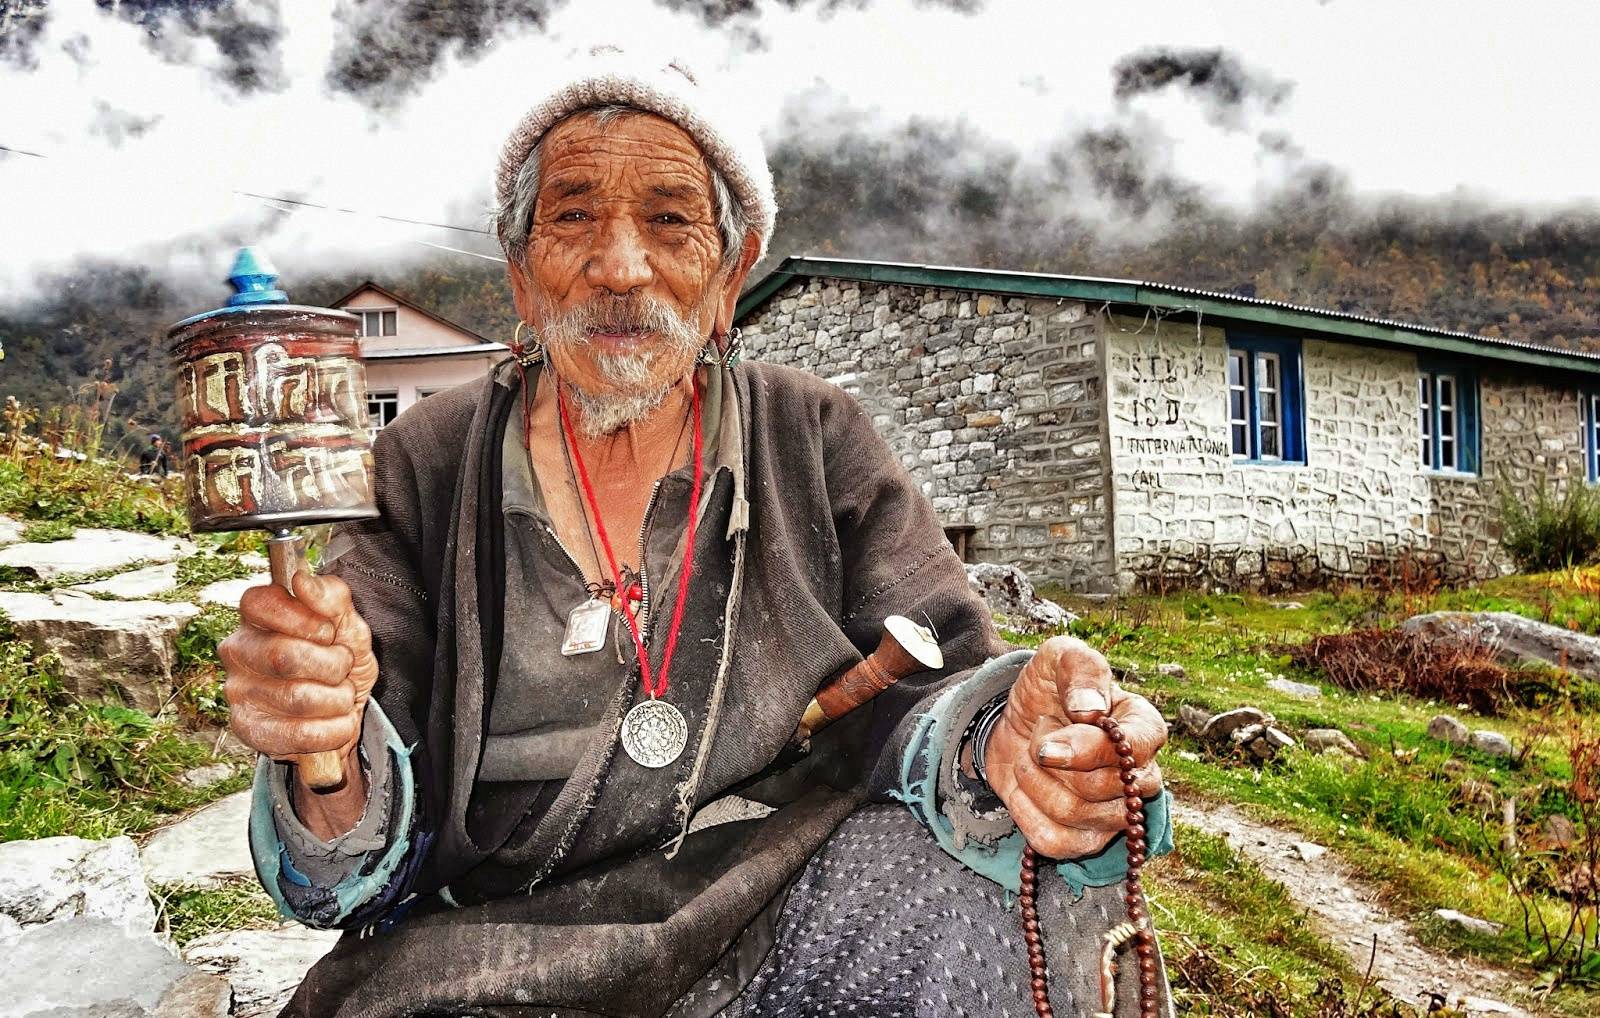 This old man turns a prayer wheel all day long.